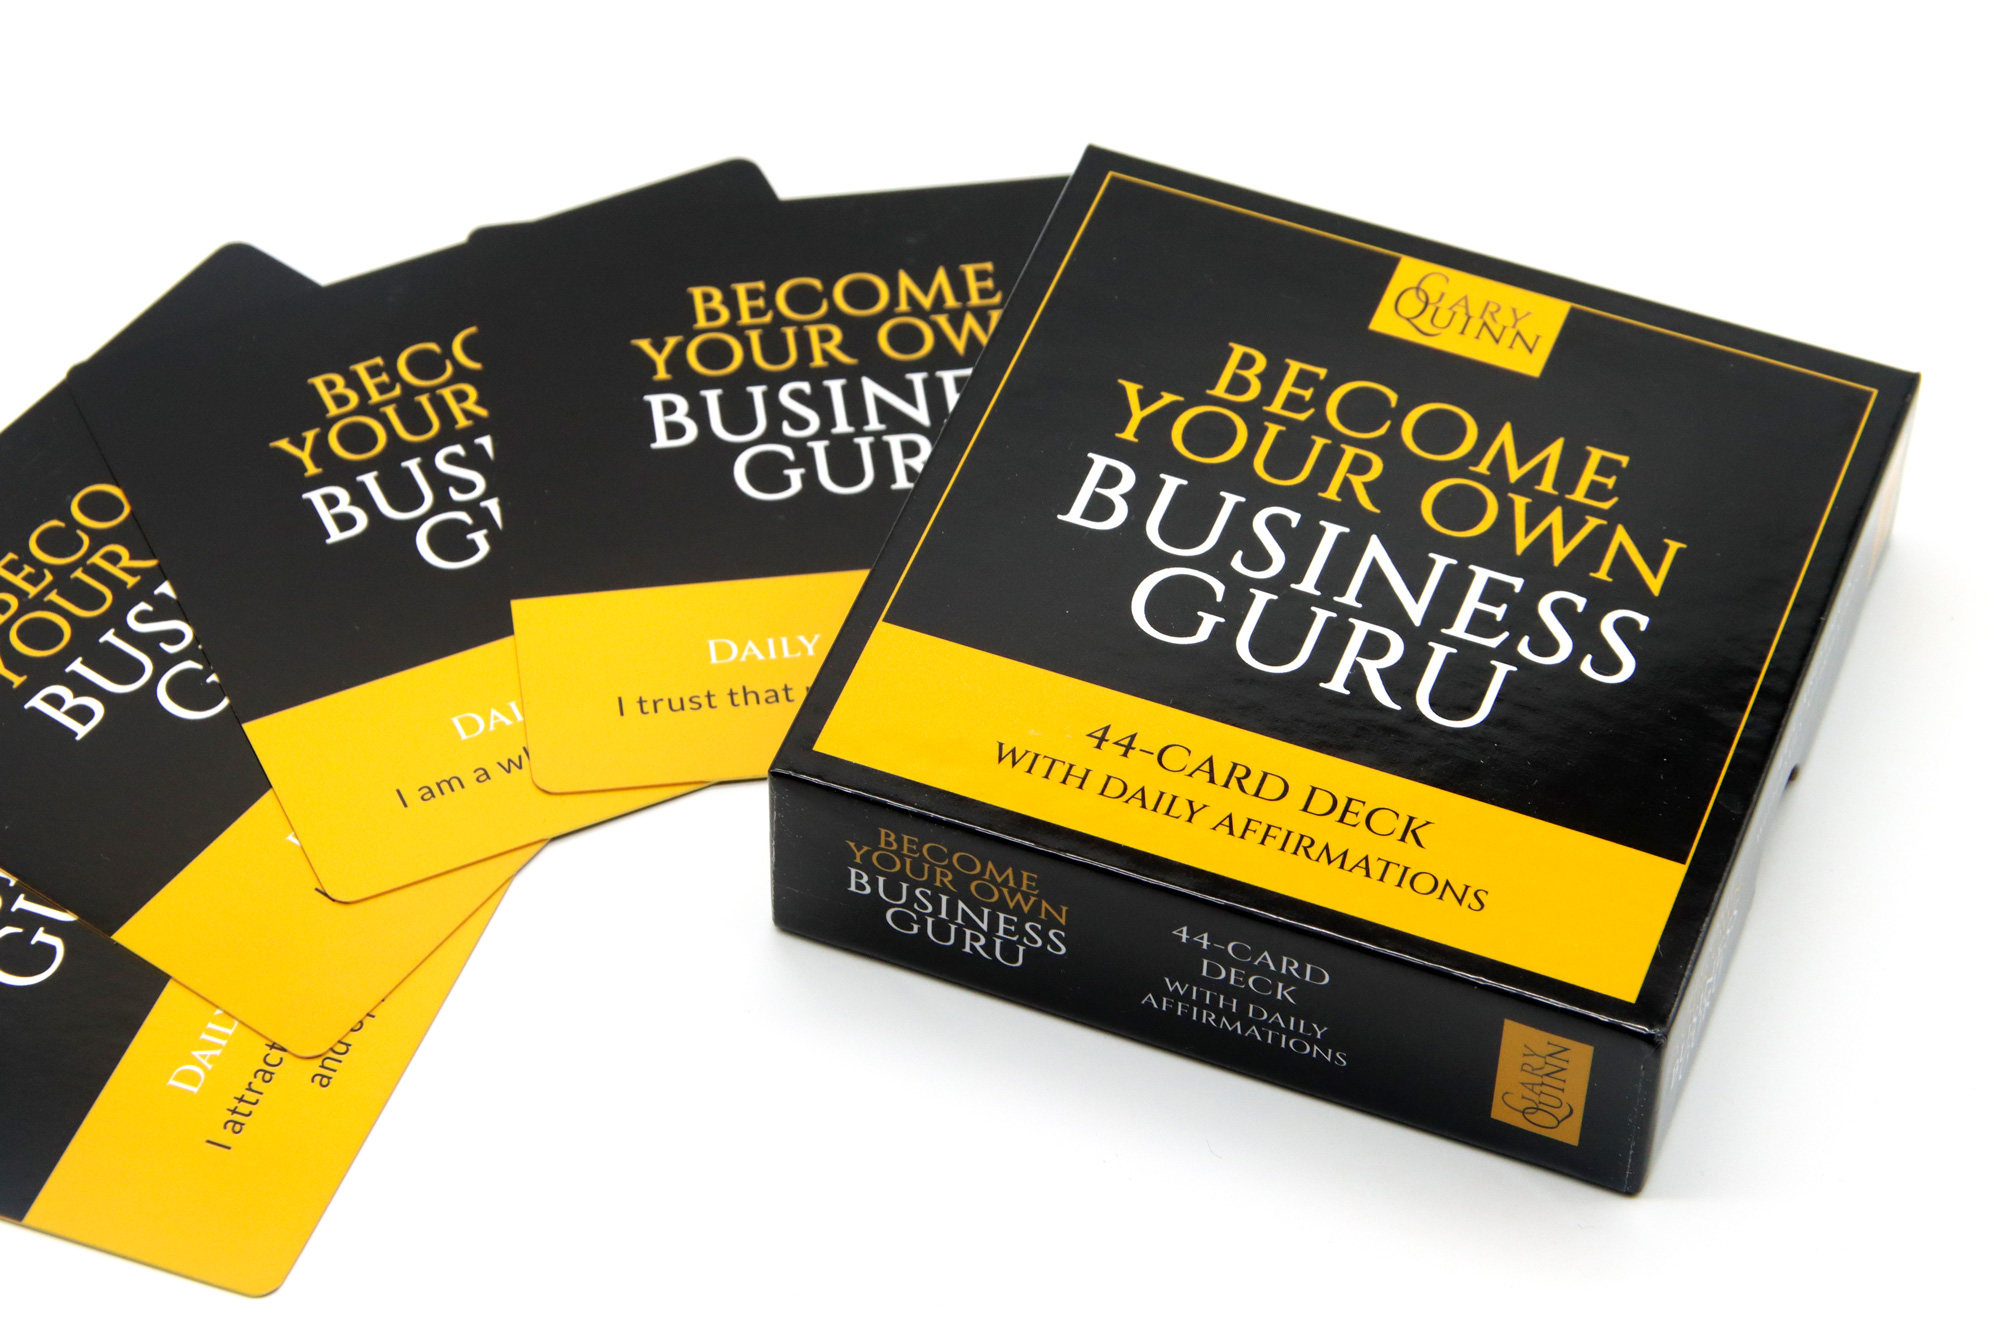 Become Your Own Business Guru